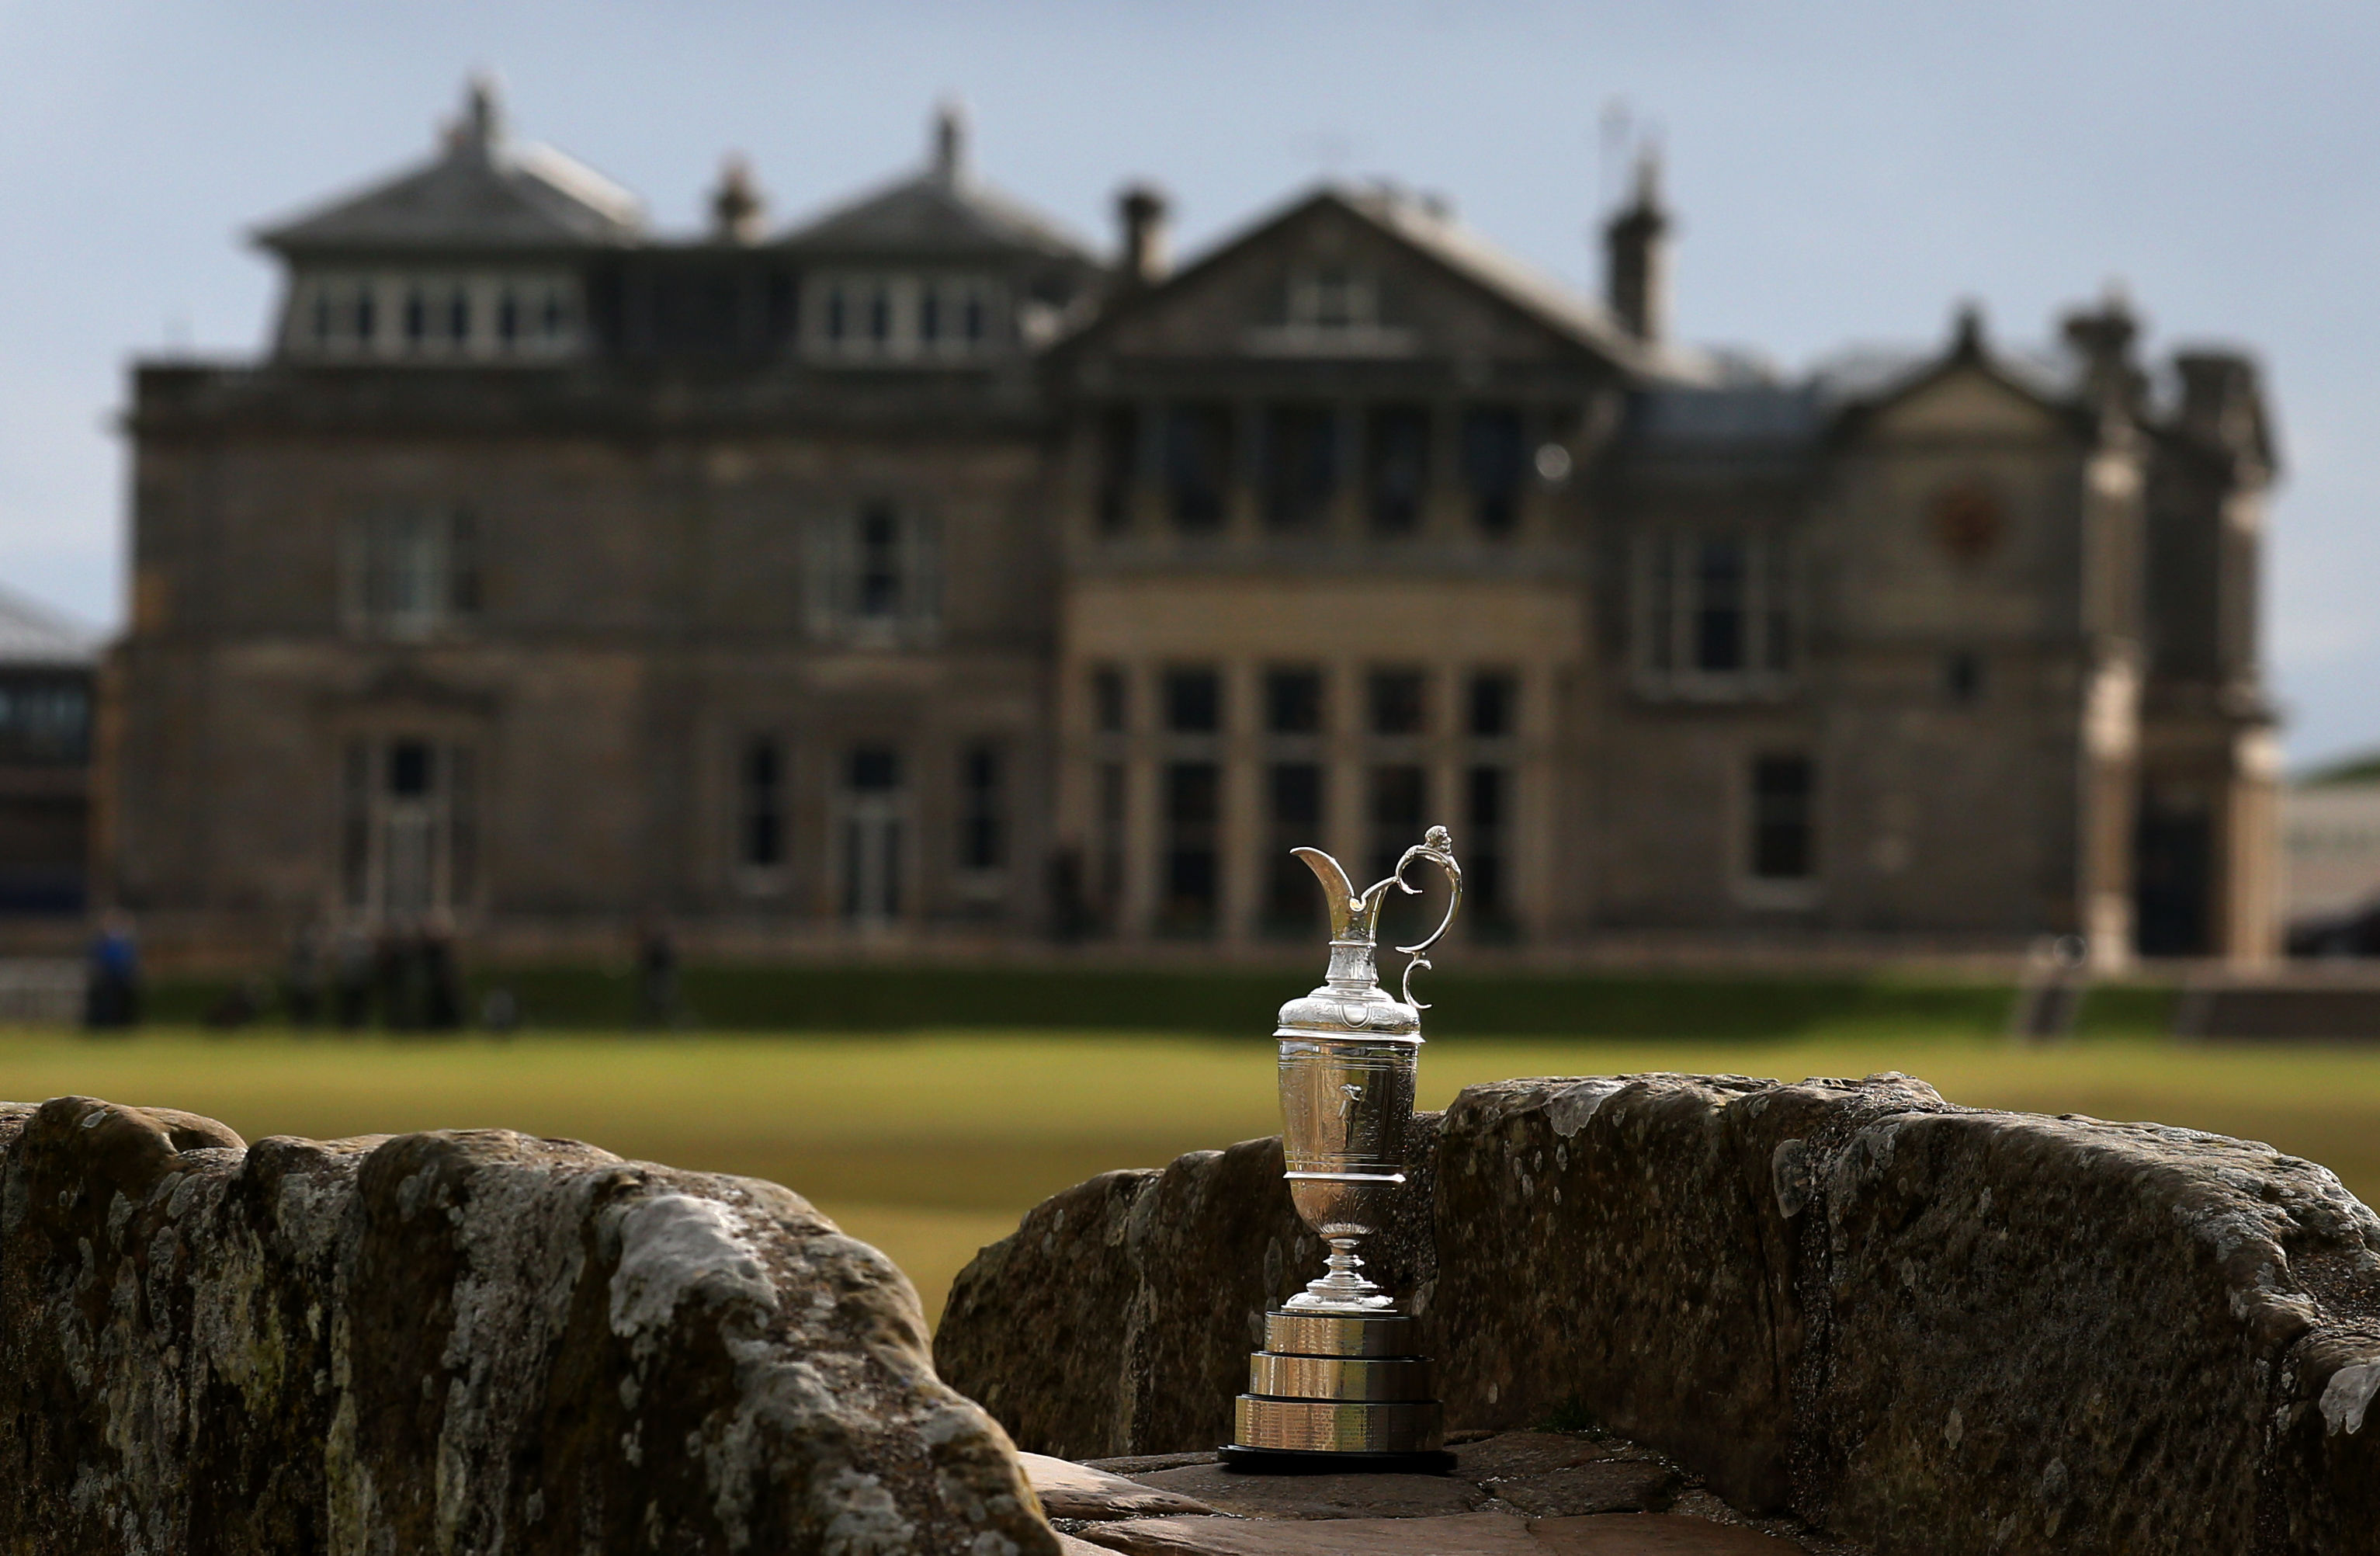 British Open Preview: Golf's Oldest And Most Revered Championship